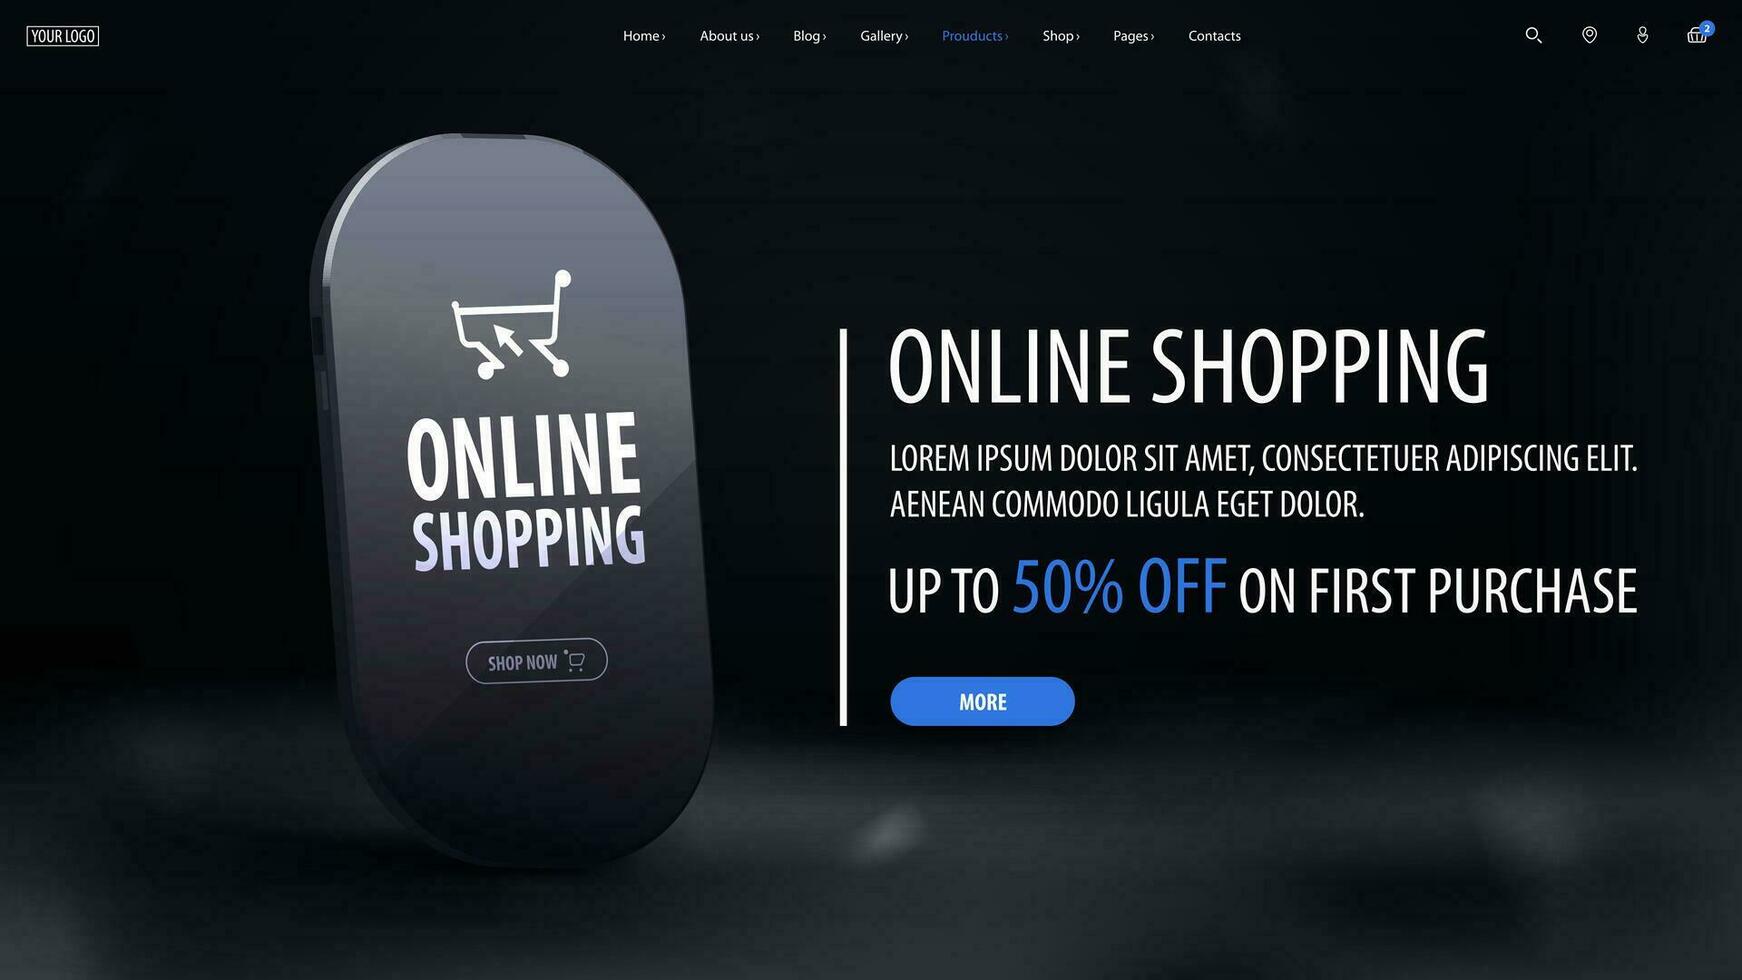 Online shopping, dark discount banner with offer and smartphone on dark background with fog vector